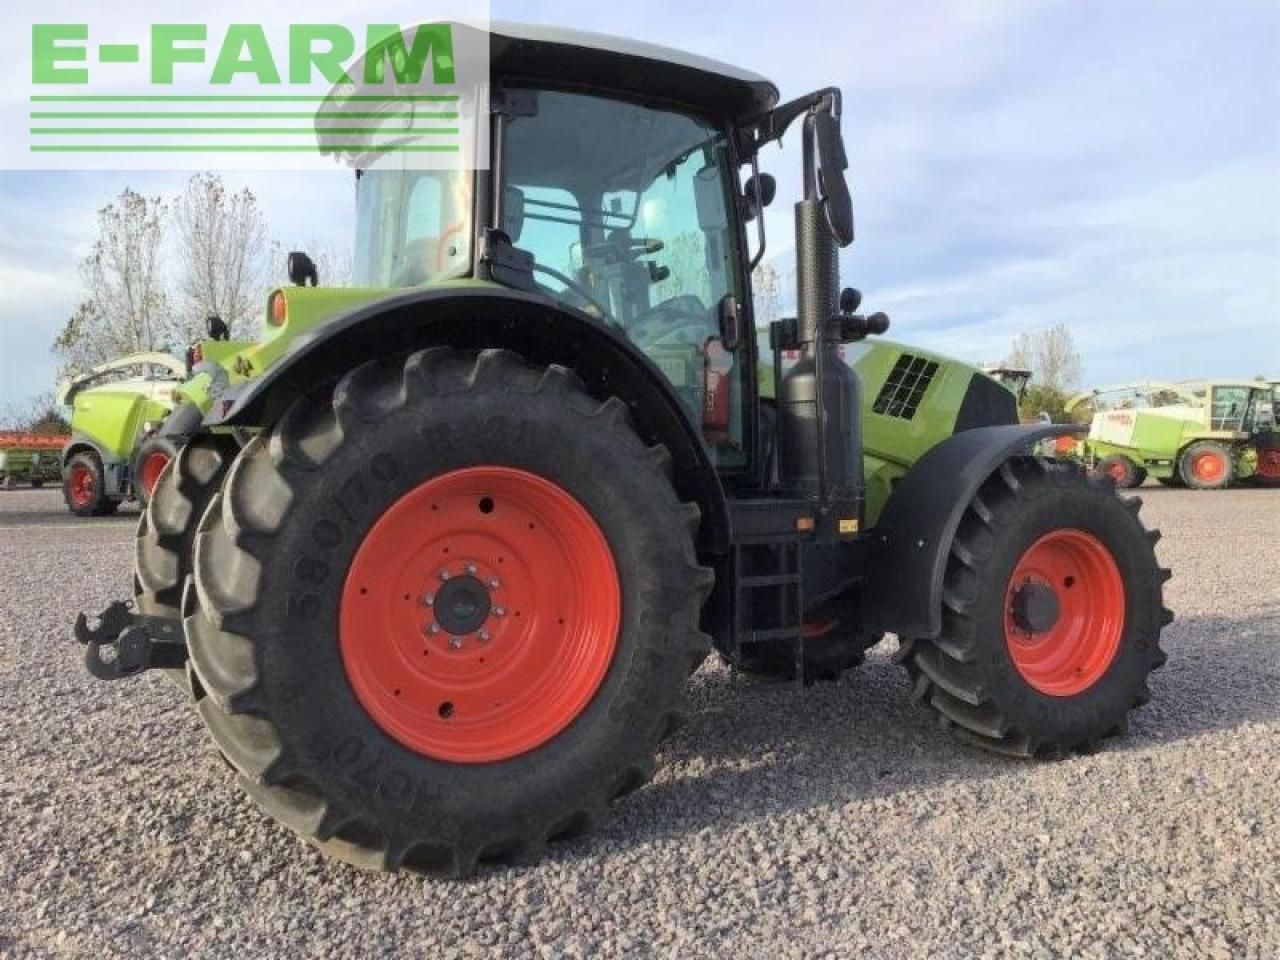 Tractor CLAAS arion 630 hexa stage v